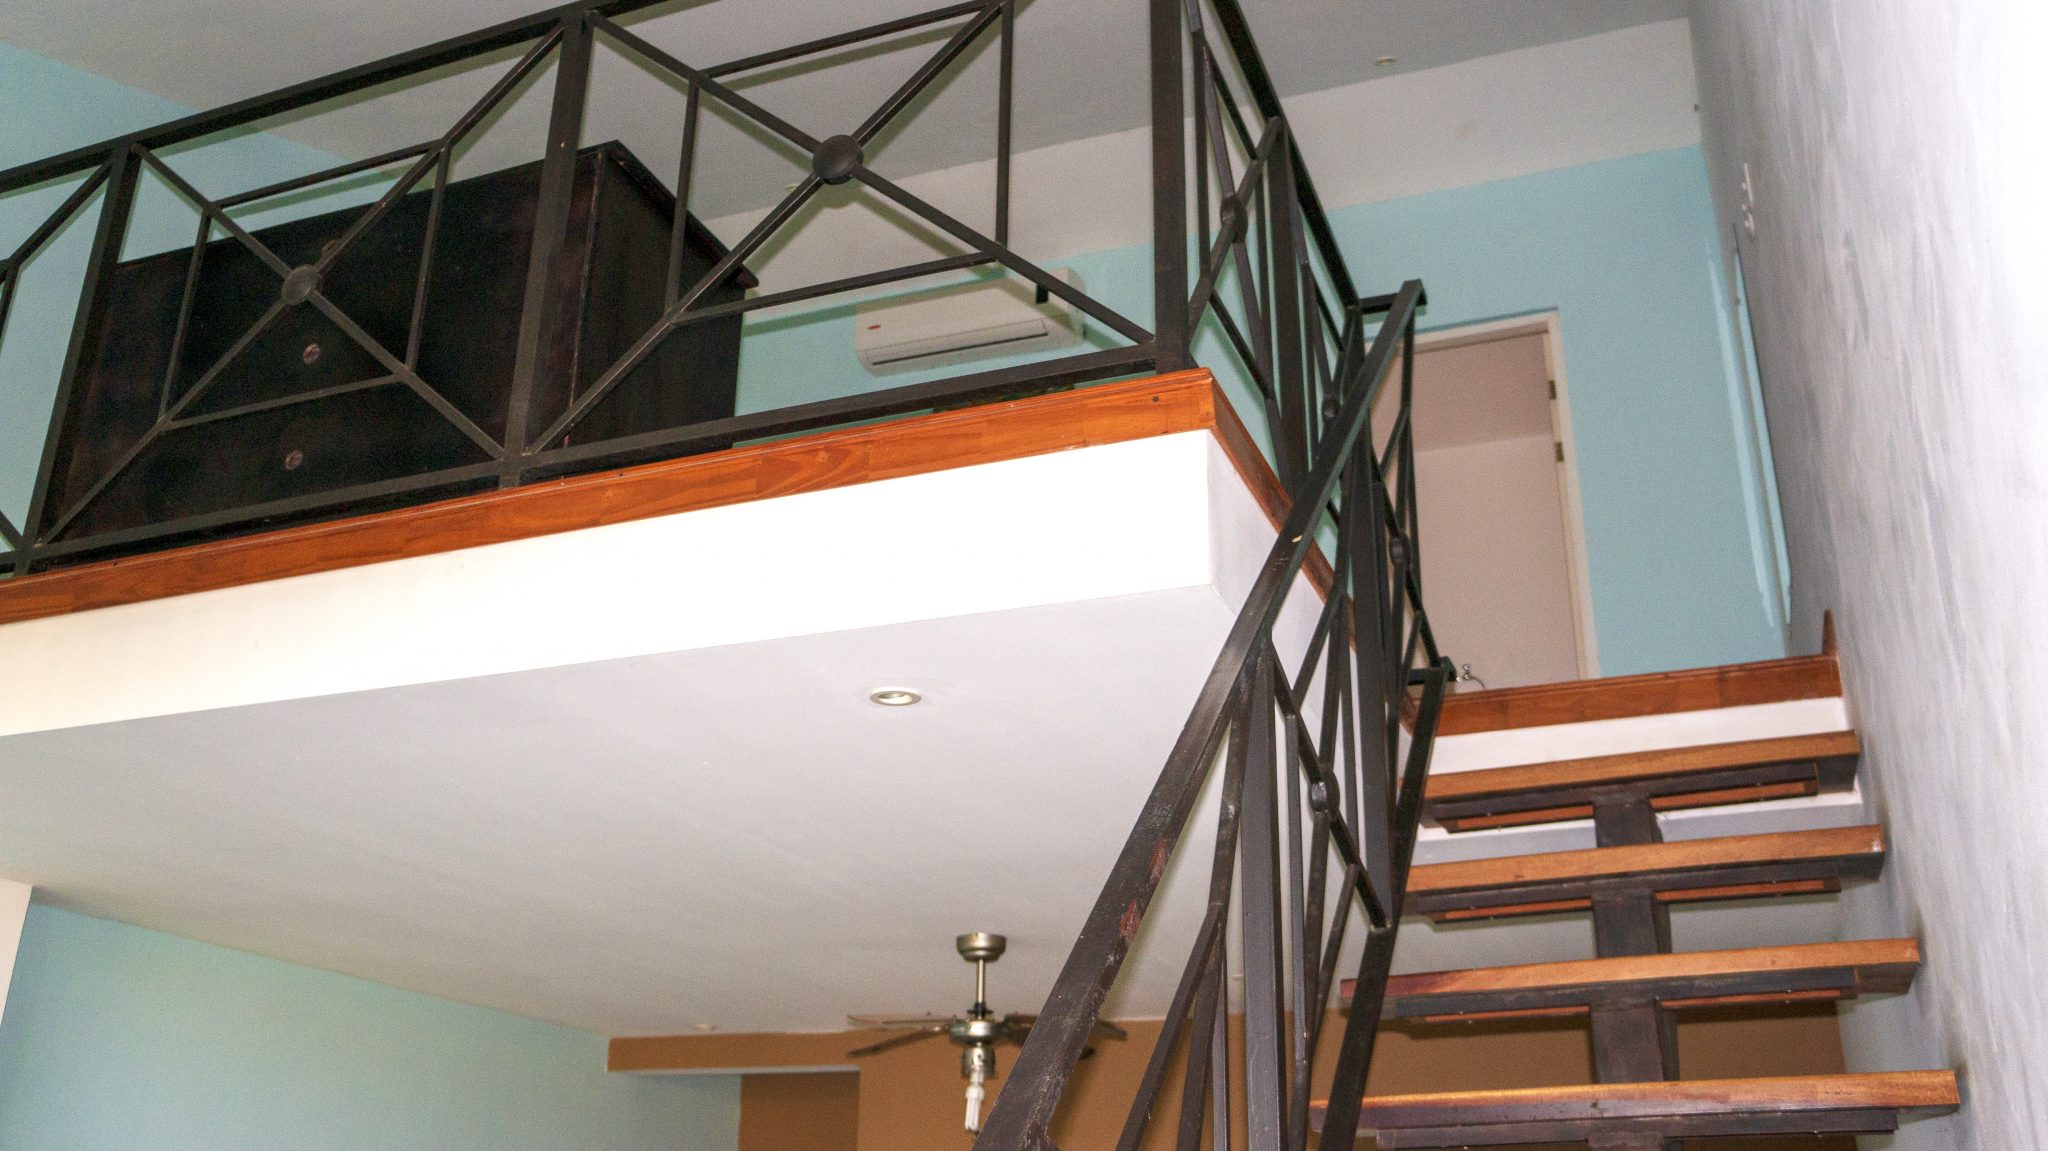 PL4 - Stairs to Loft Bedroom